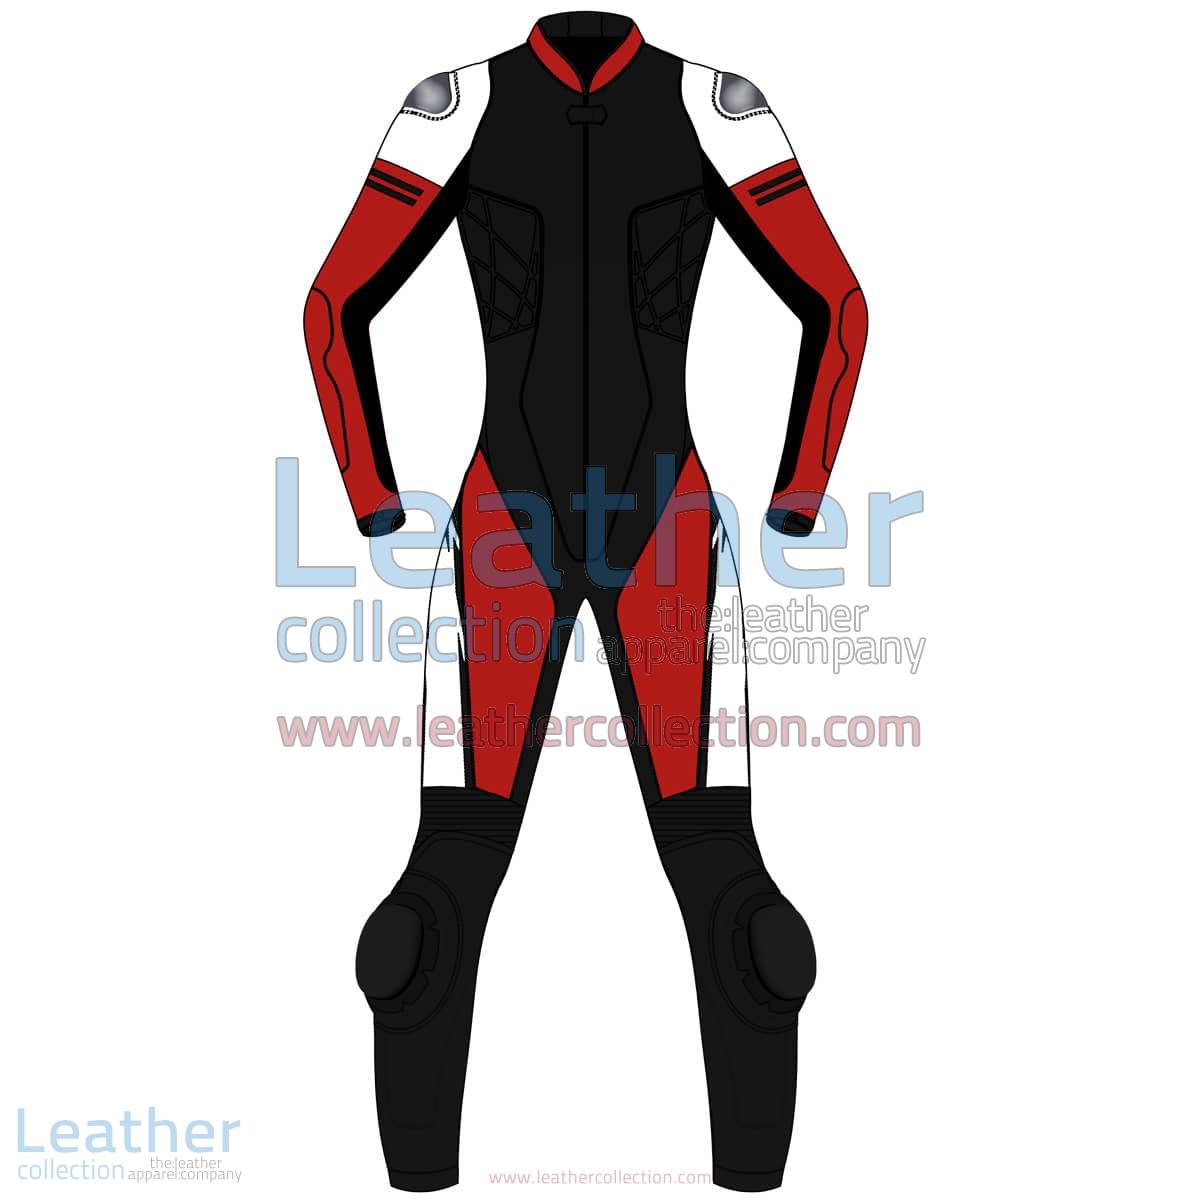 Tri Color One-Piece Motorbike Leather Suit For Women | Tri Color One-Piece motorcycle Leather Suit For Women